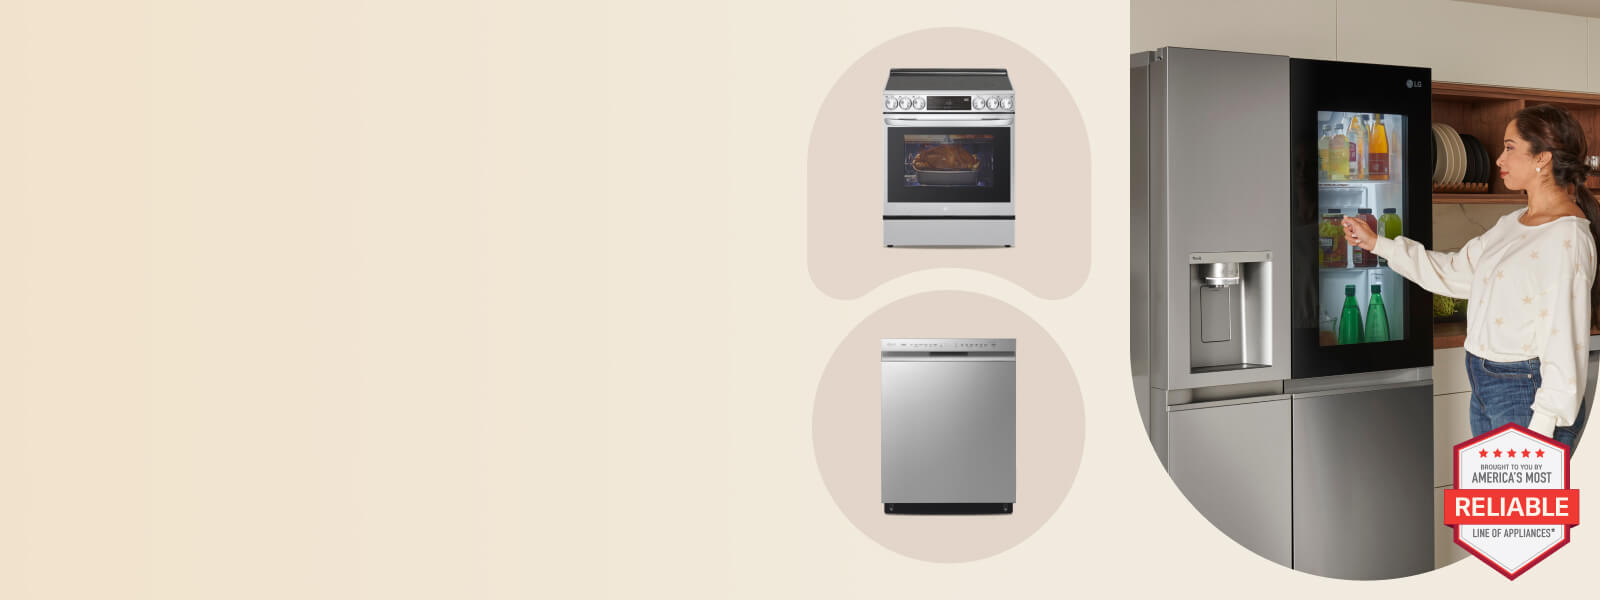 Save up to $400 on a perfect kitchen matchup image for desktop